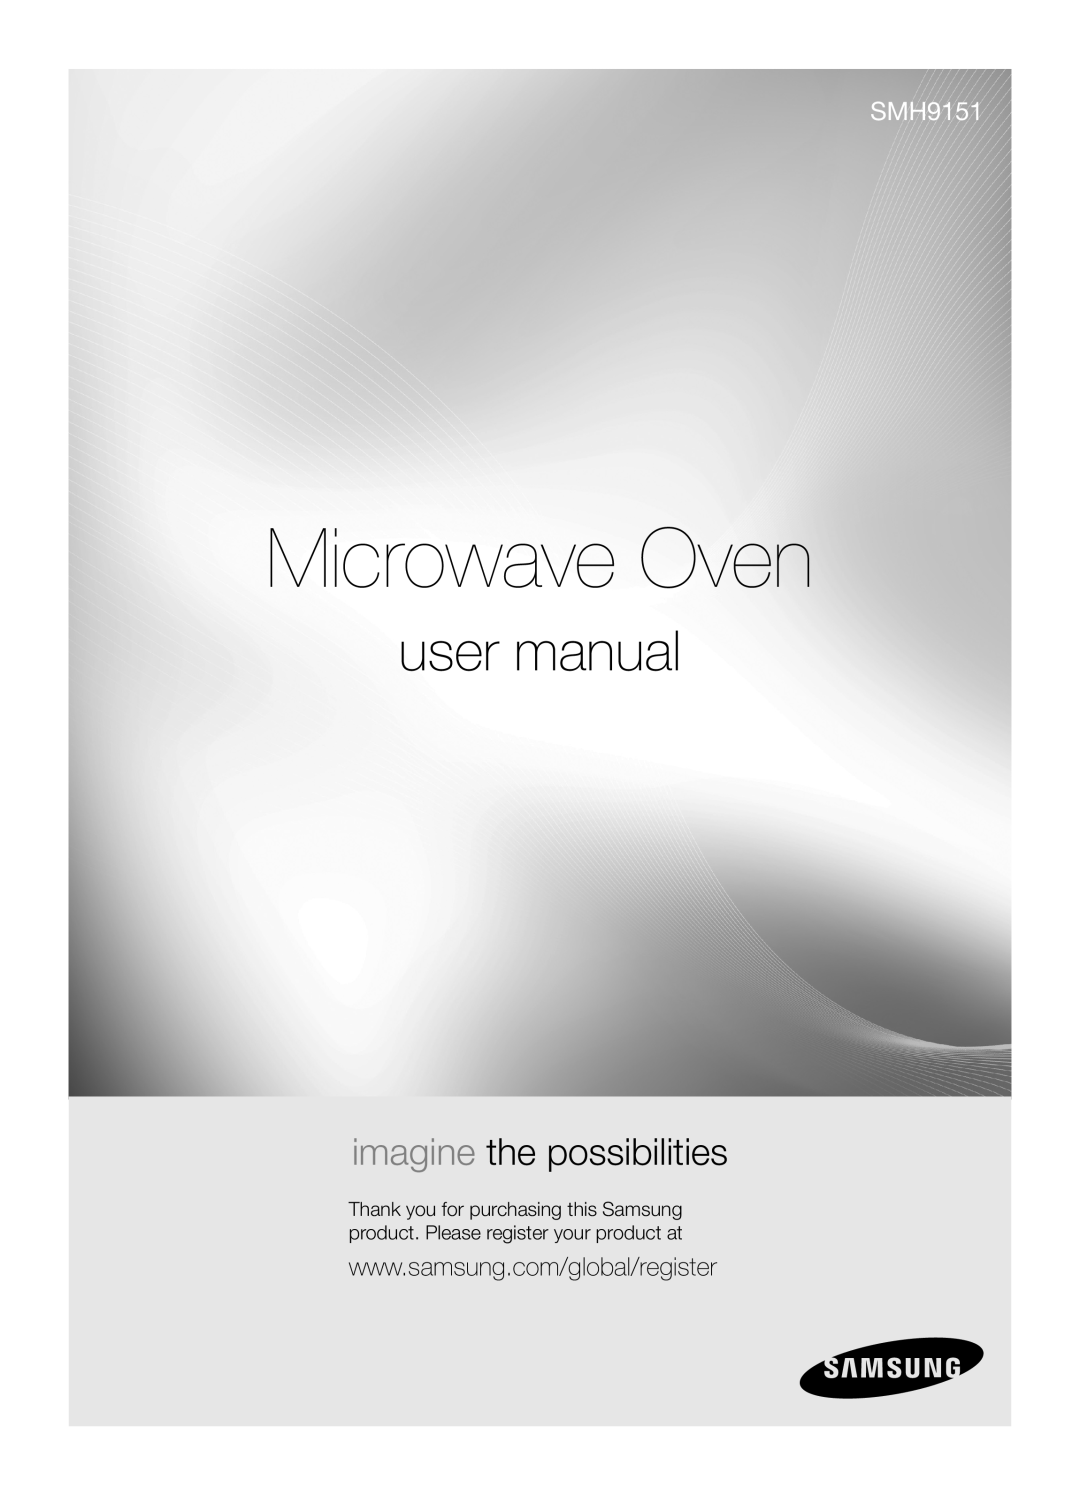 Samsung SMH9151B user manual Microwave Oven, imagine the possibilities 